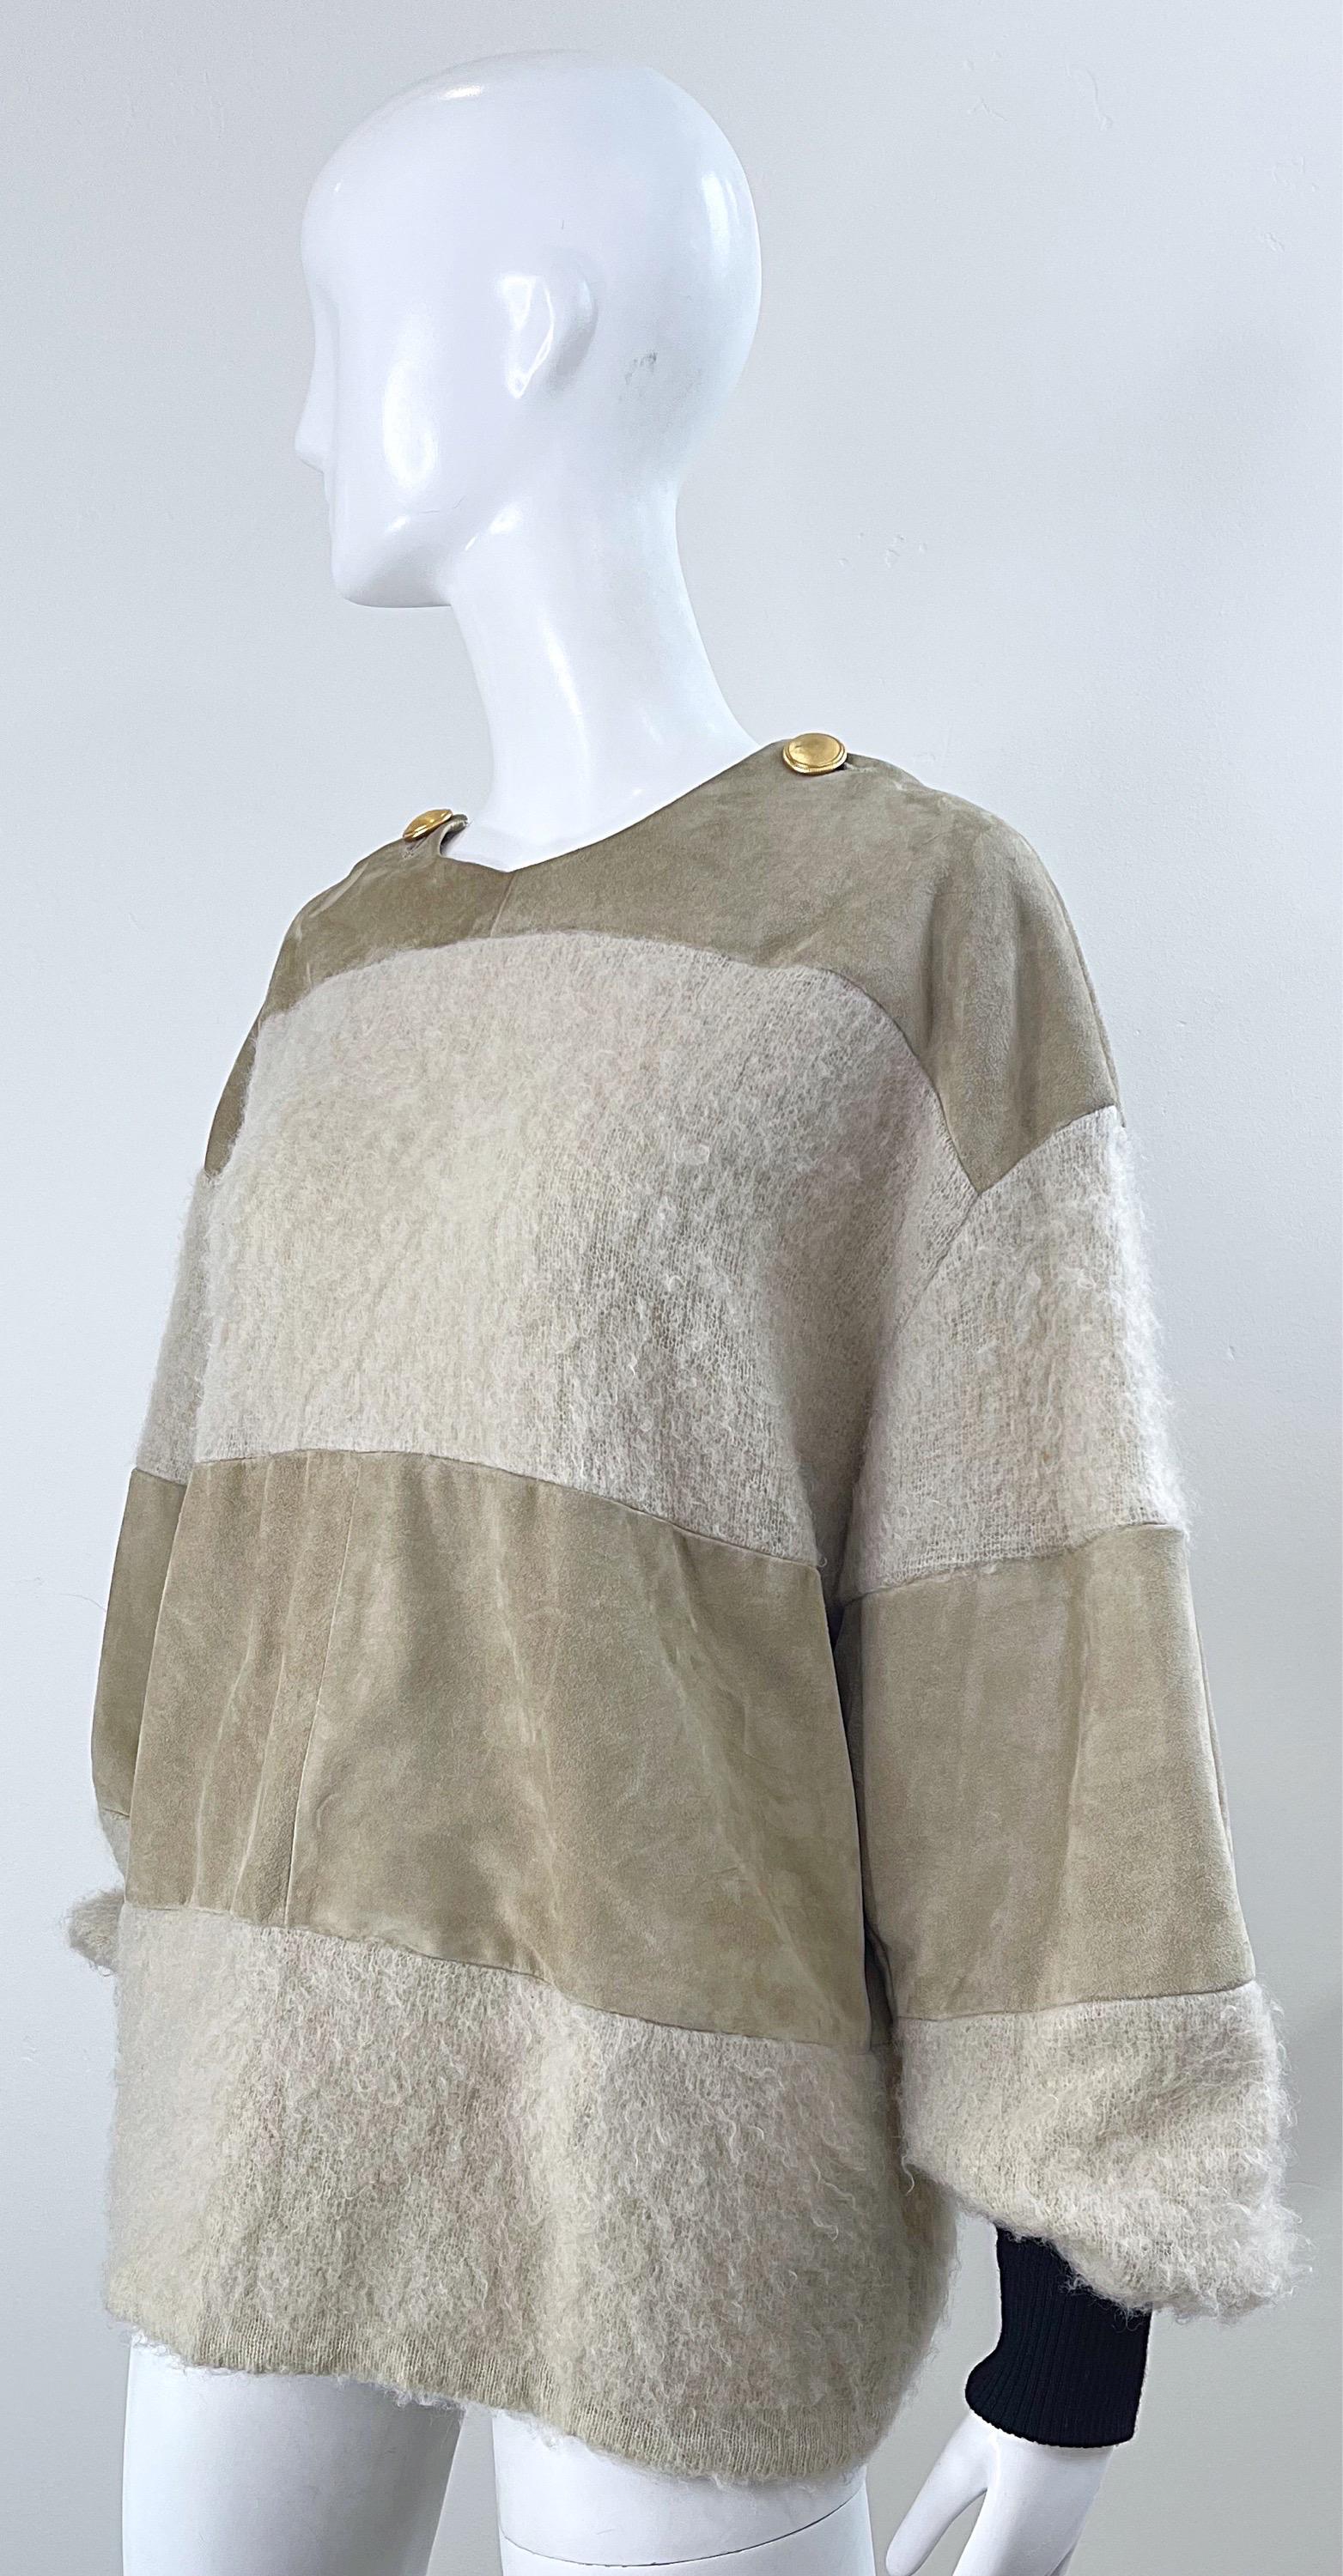 Gianfranco Ferre 1990s Leather Suede + Mohair Tan Nude Vintage 90s Sweater Top For Sale 6